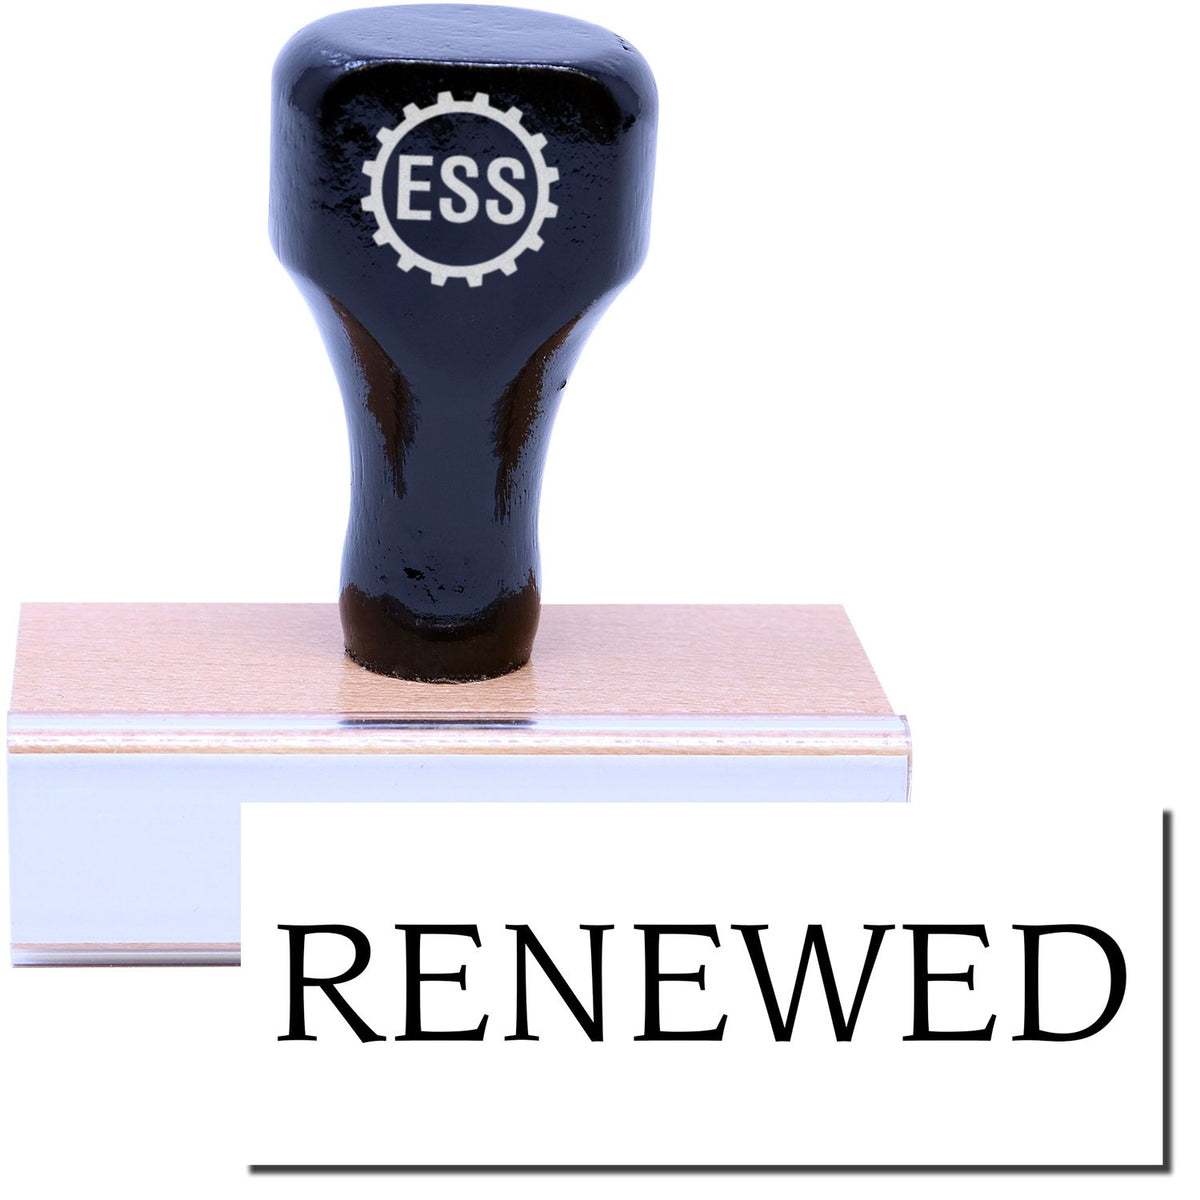 A stock office rubber stamp with a stamped image showing how the text &quot;RENEWED&quot; in a large font is displayed after stamping.